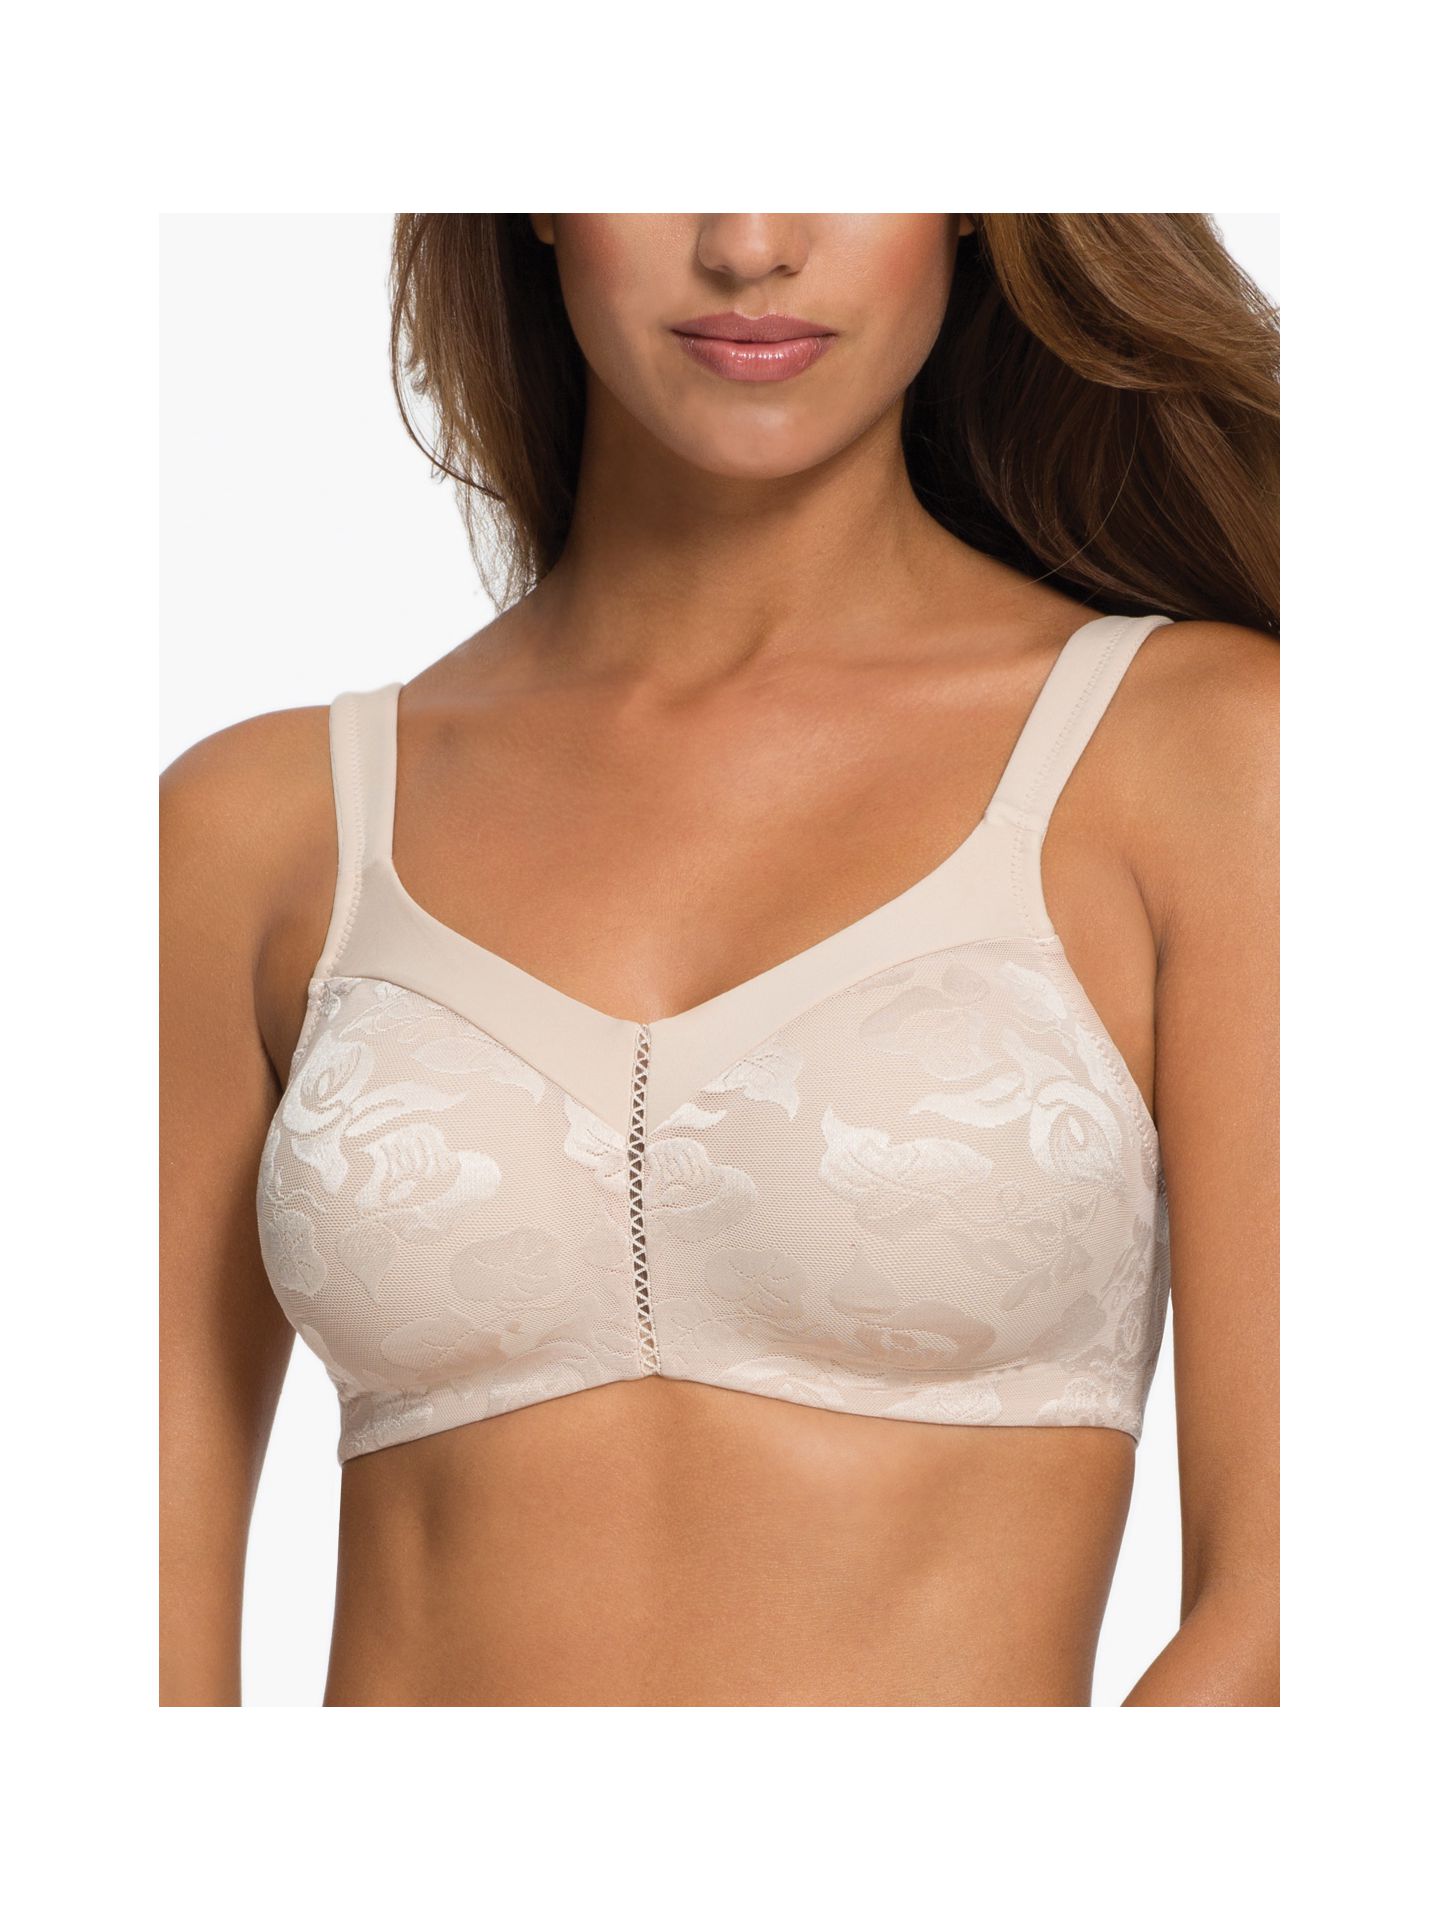 Wacoal 85276 Awareness Soft Cup Bra 38 DD Natural Nude 38dd for sale online